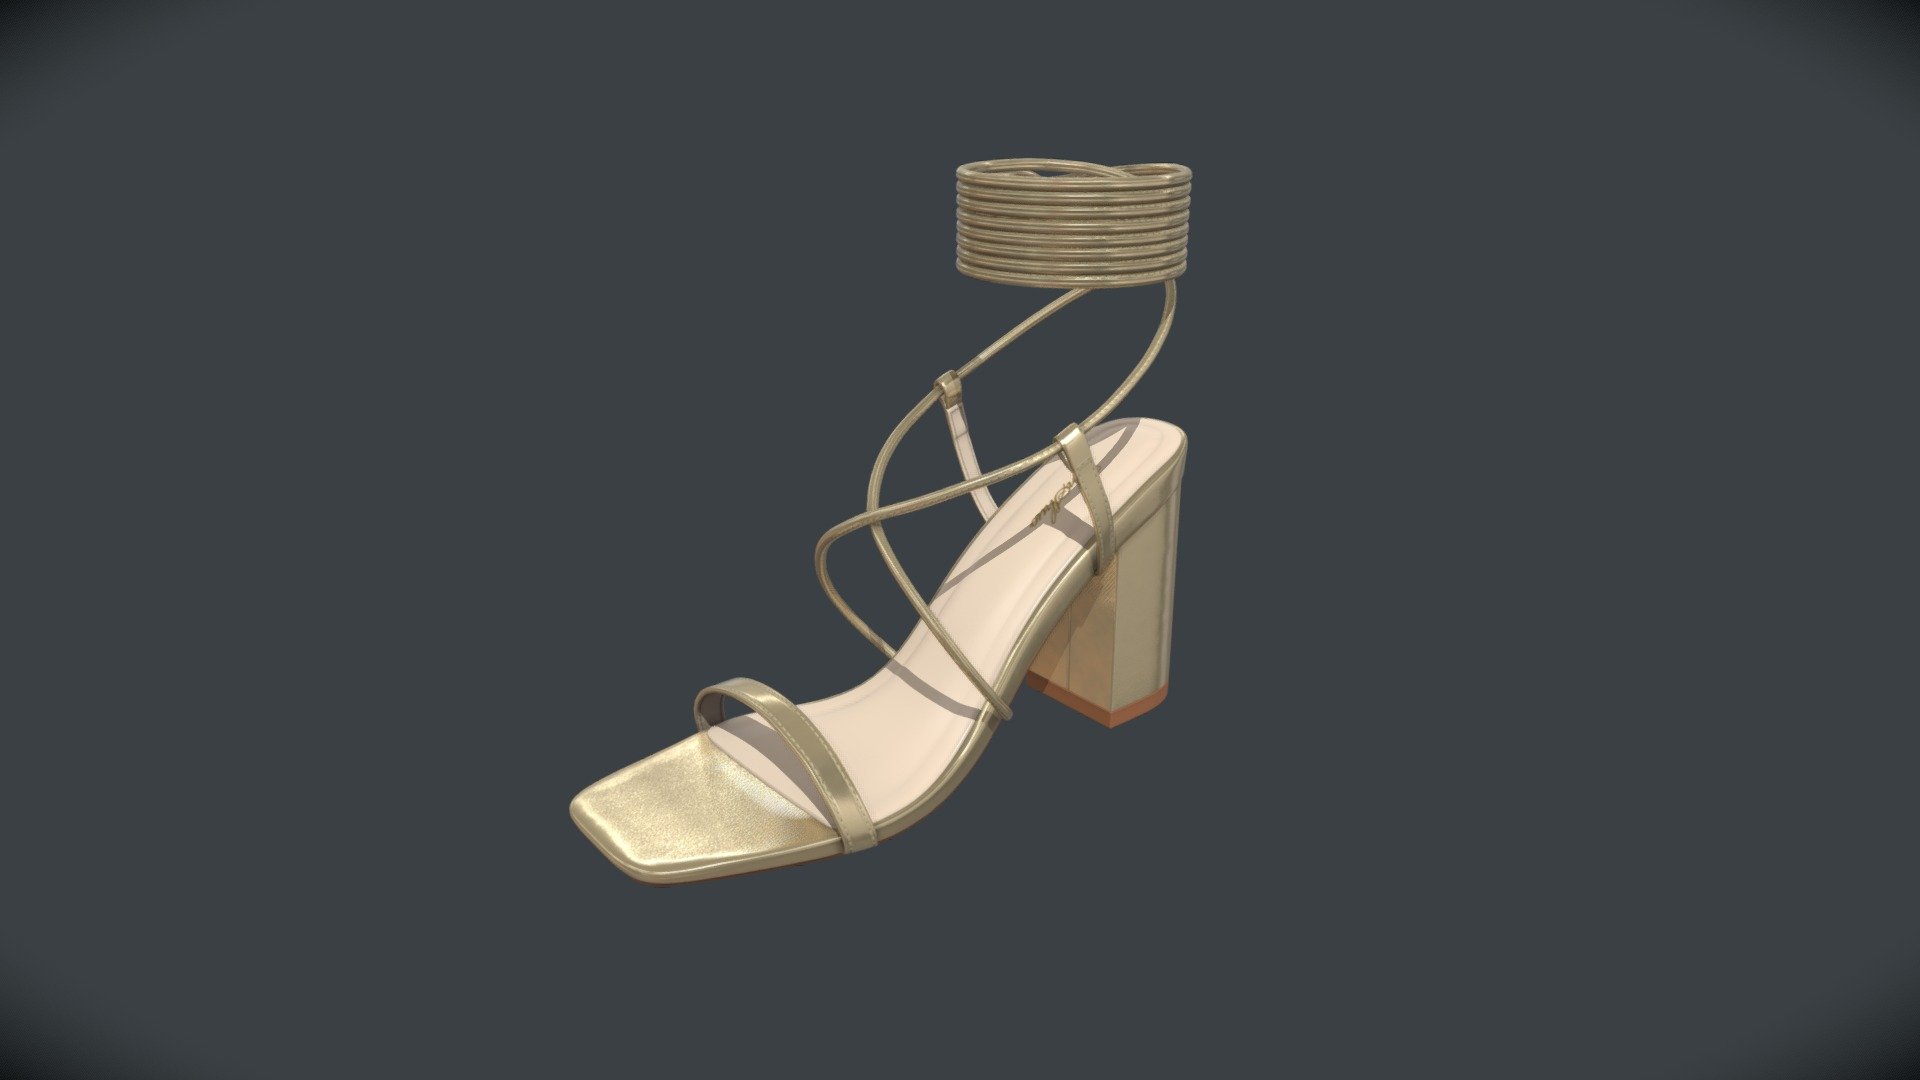 High heels with practical sizes are easy for many uses.
I hope you like it, there are many other related products, please stop by 3d model